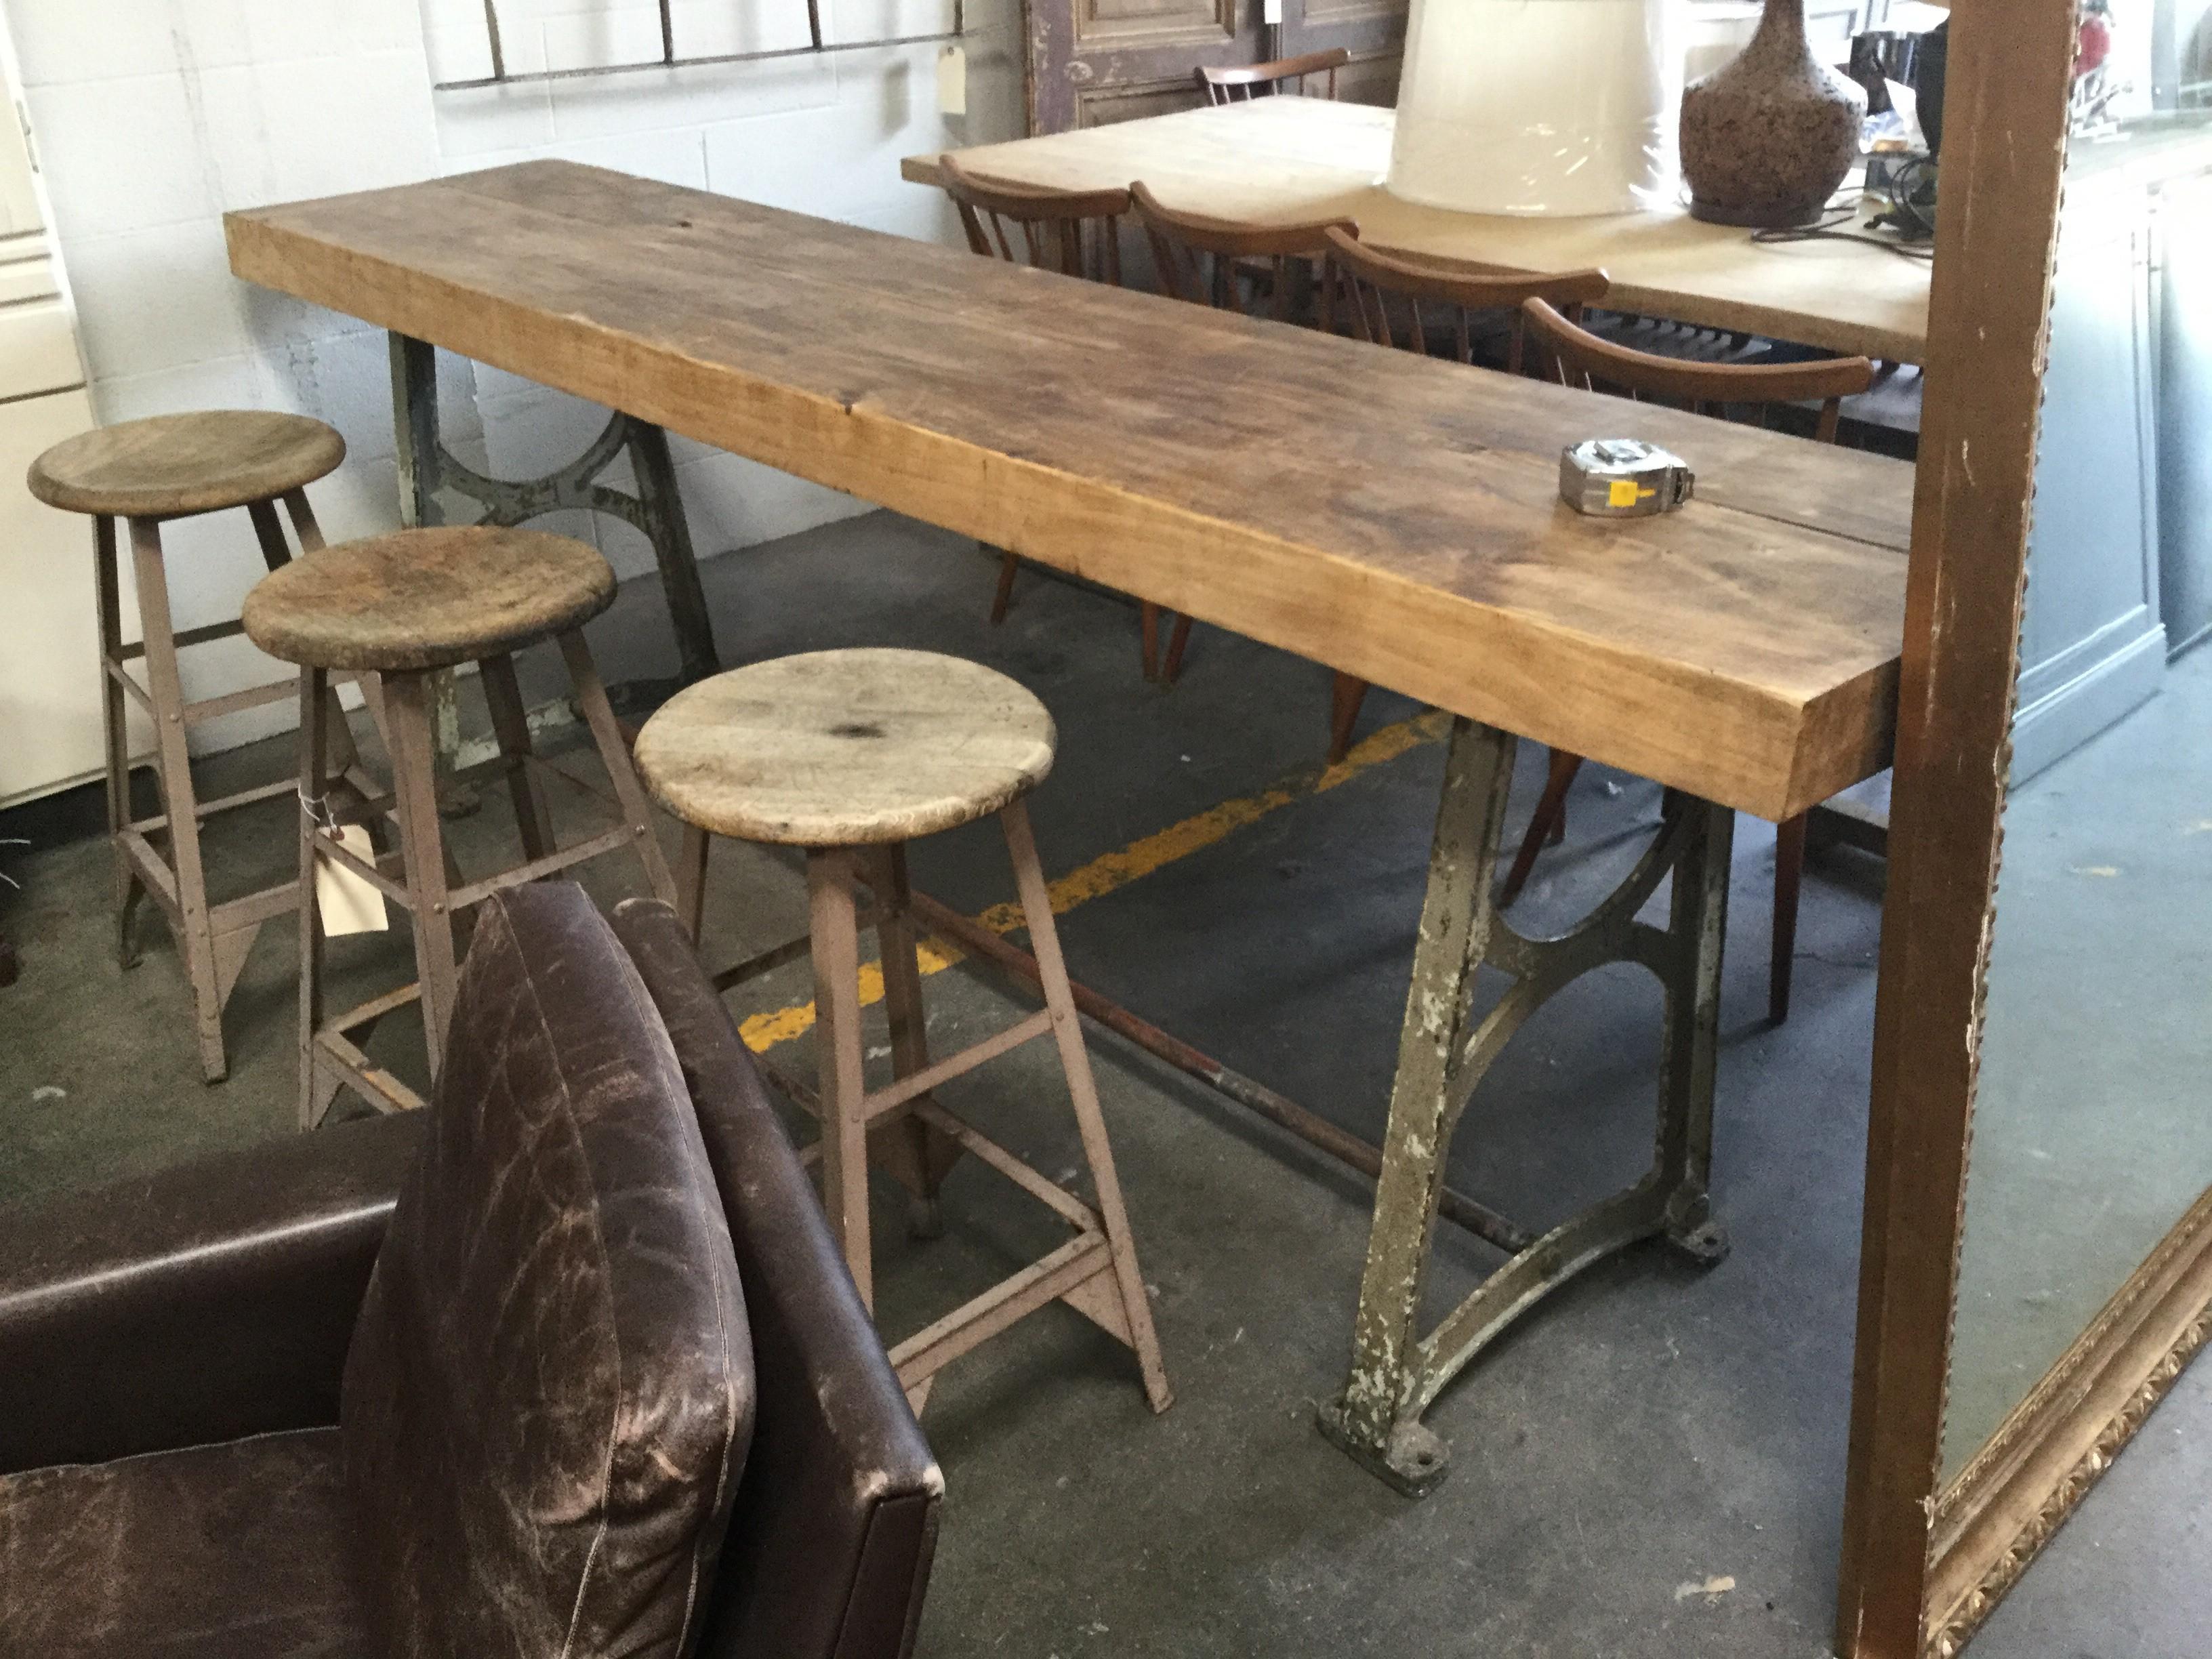 Super unique vintage European work table. Solid wood top sits upon metal base. Truly a one-of-a-kind piece!